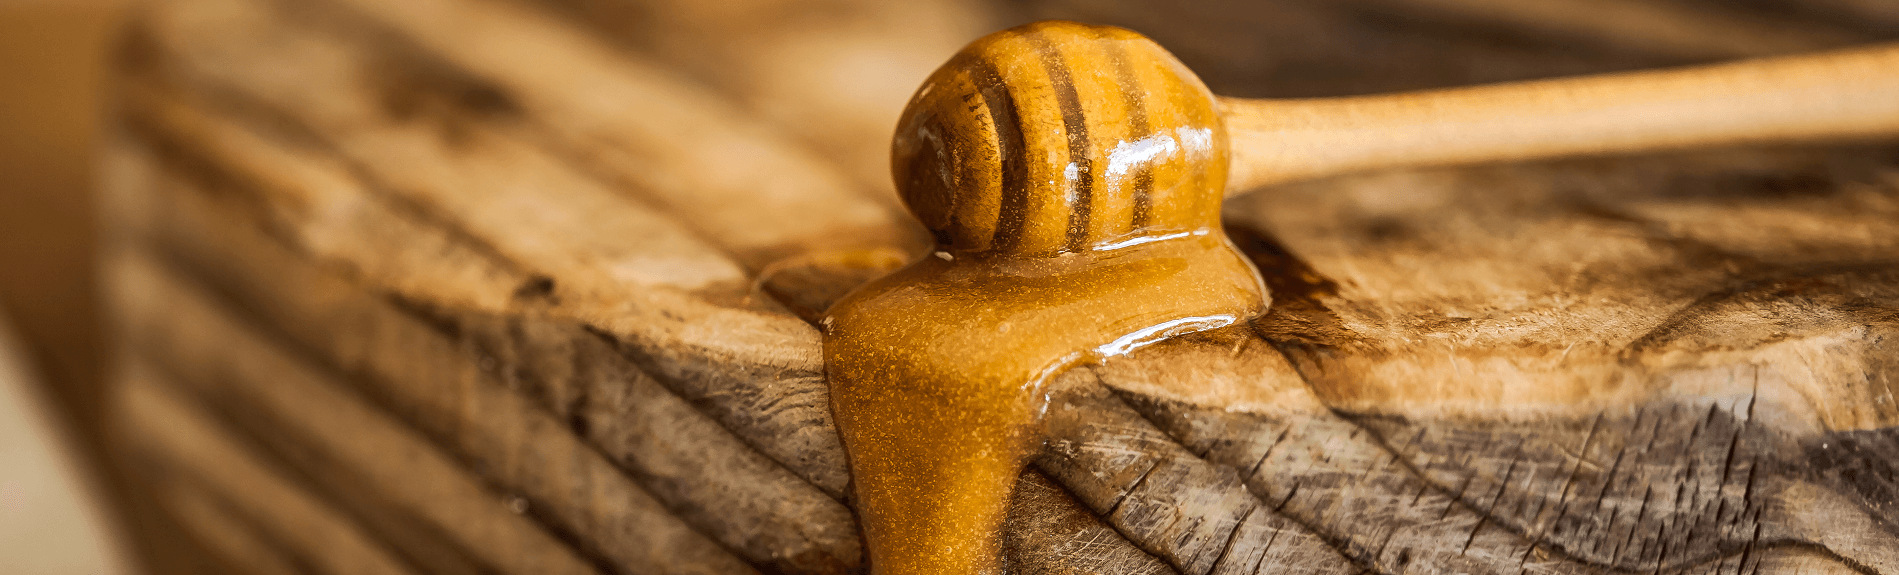 A wooden honey dipper laying on a wooden table and manuka honey slowly flowing down the table.